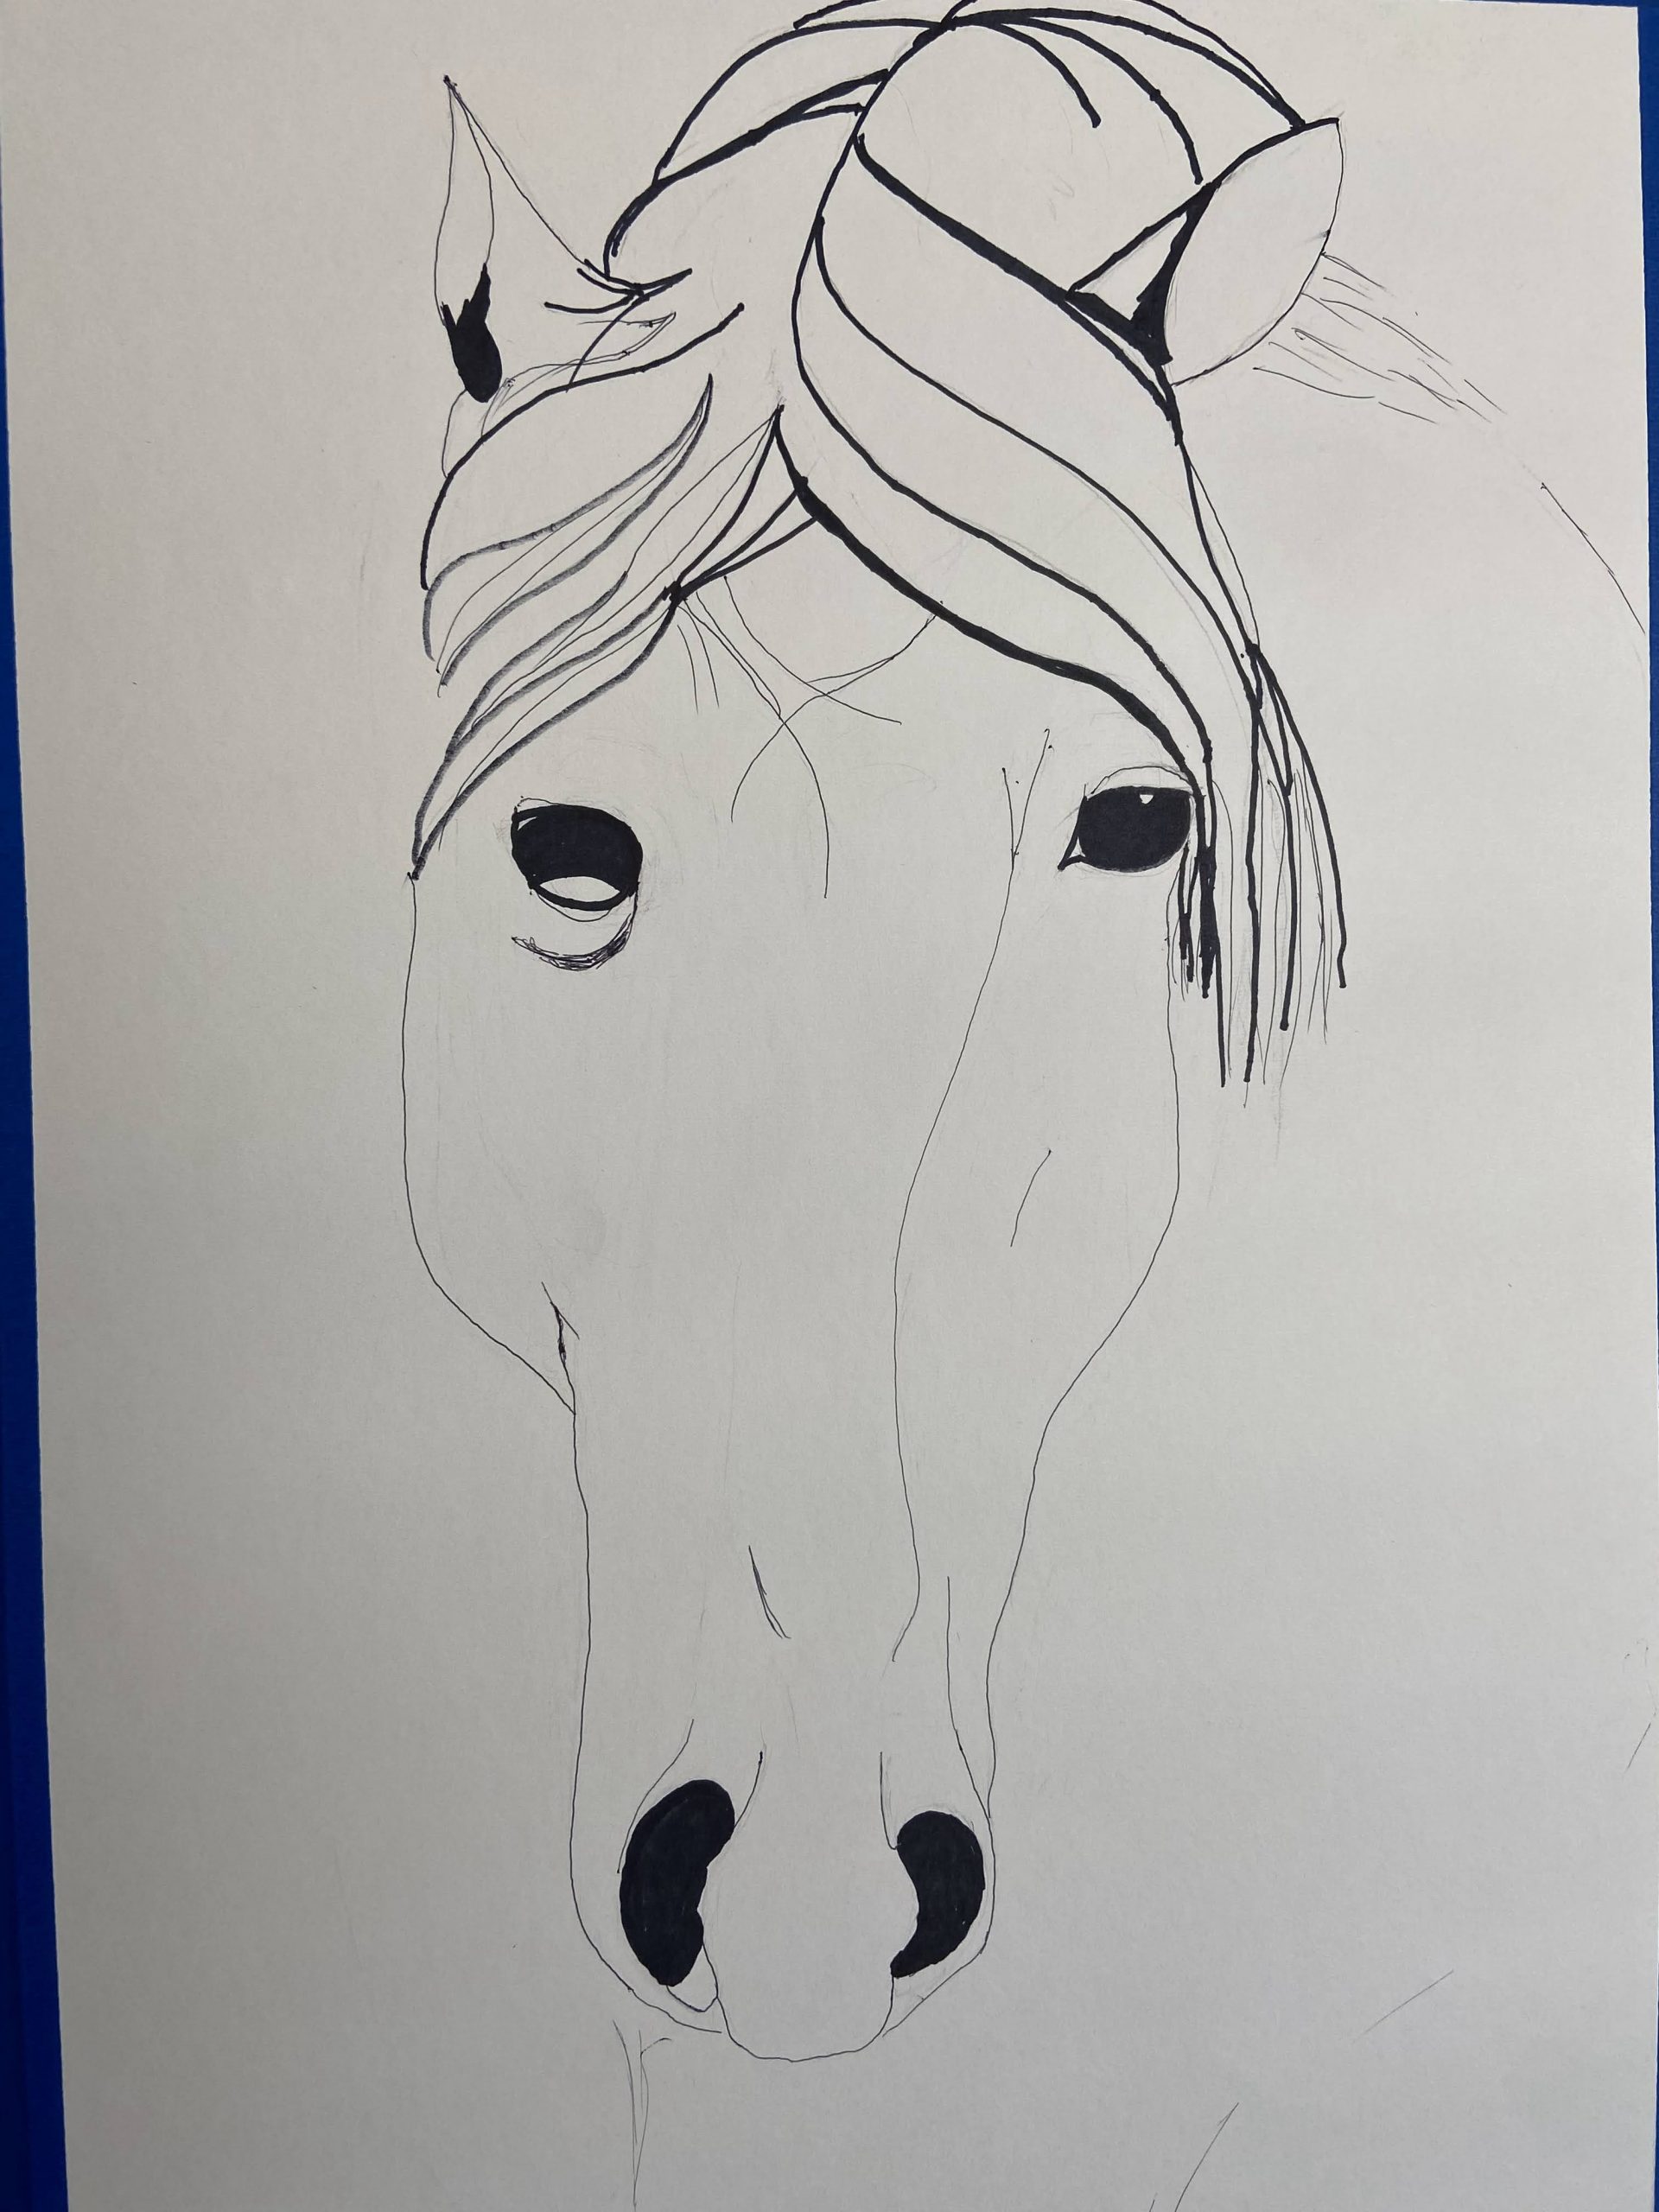 Pen and ink sketch of a horse head